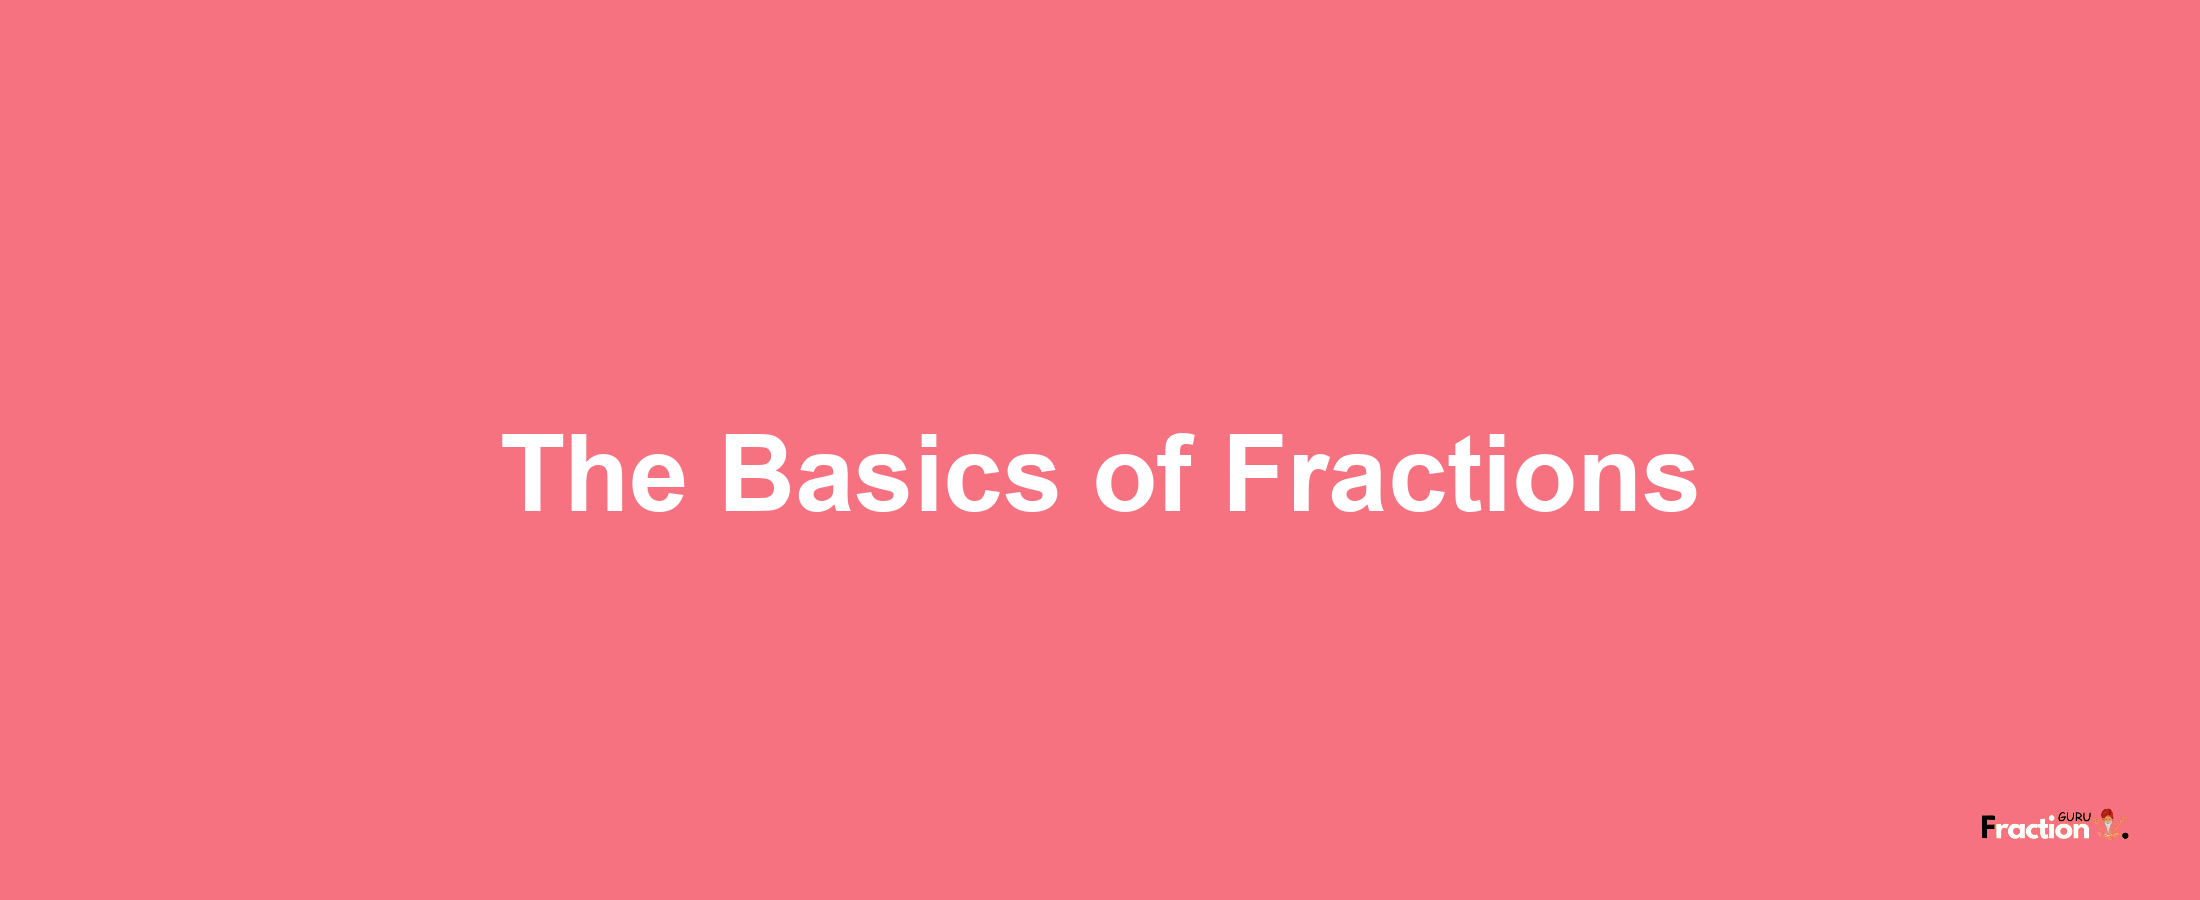 The Basics of Fractions